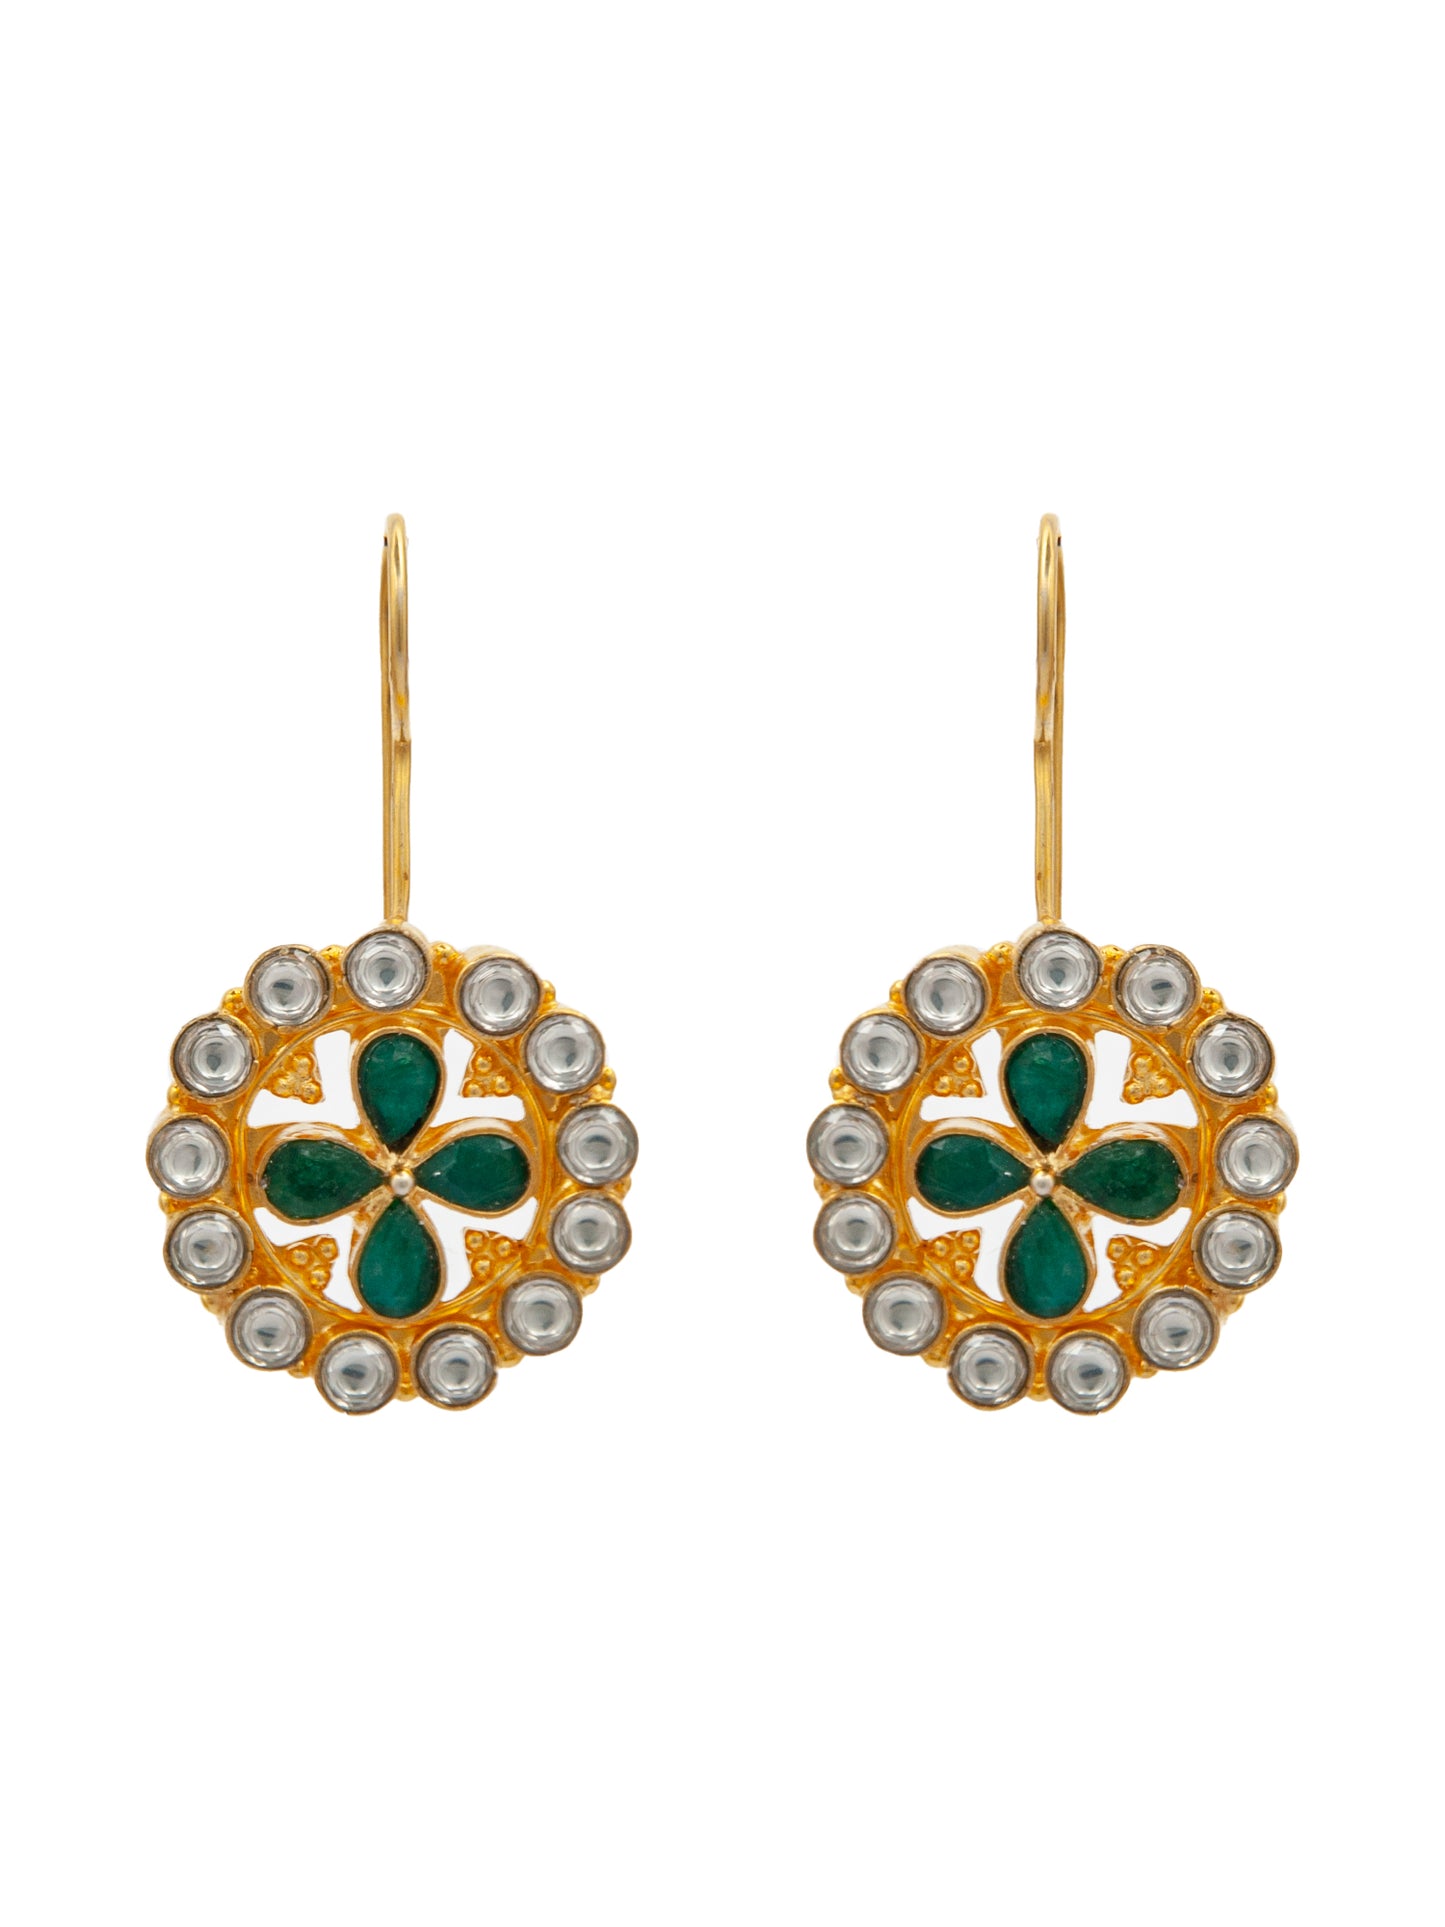 Green Elegance: 925 Sterling Silver Earrings with White Kundan and Green Onyx